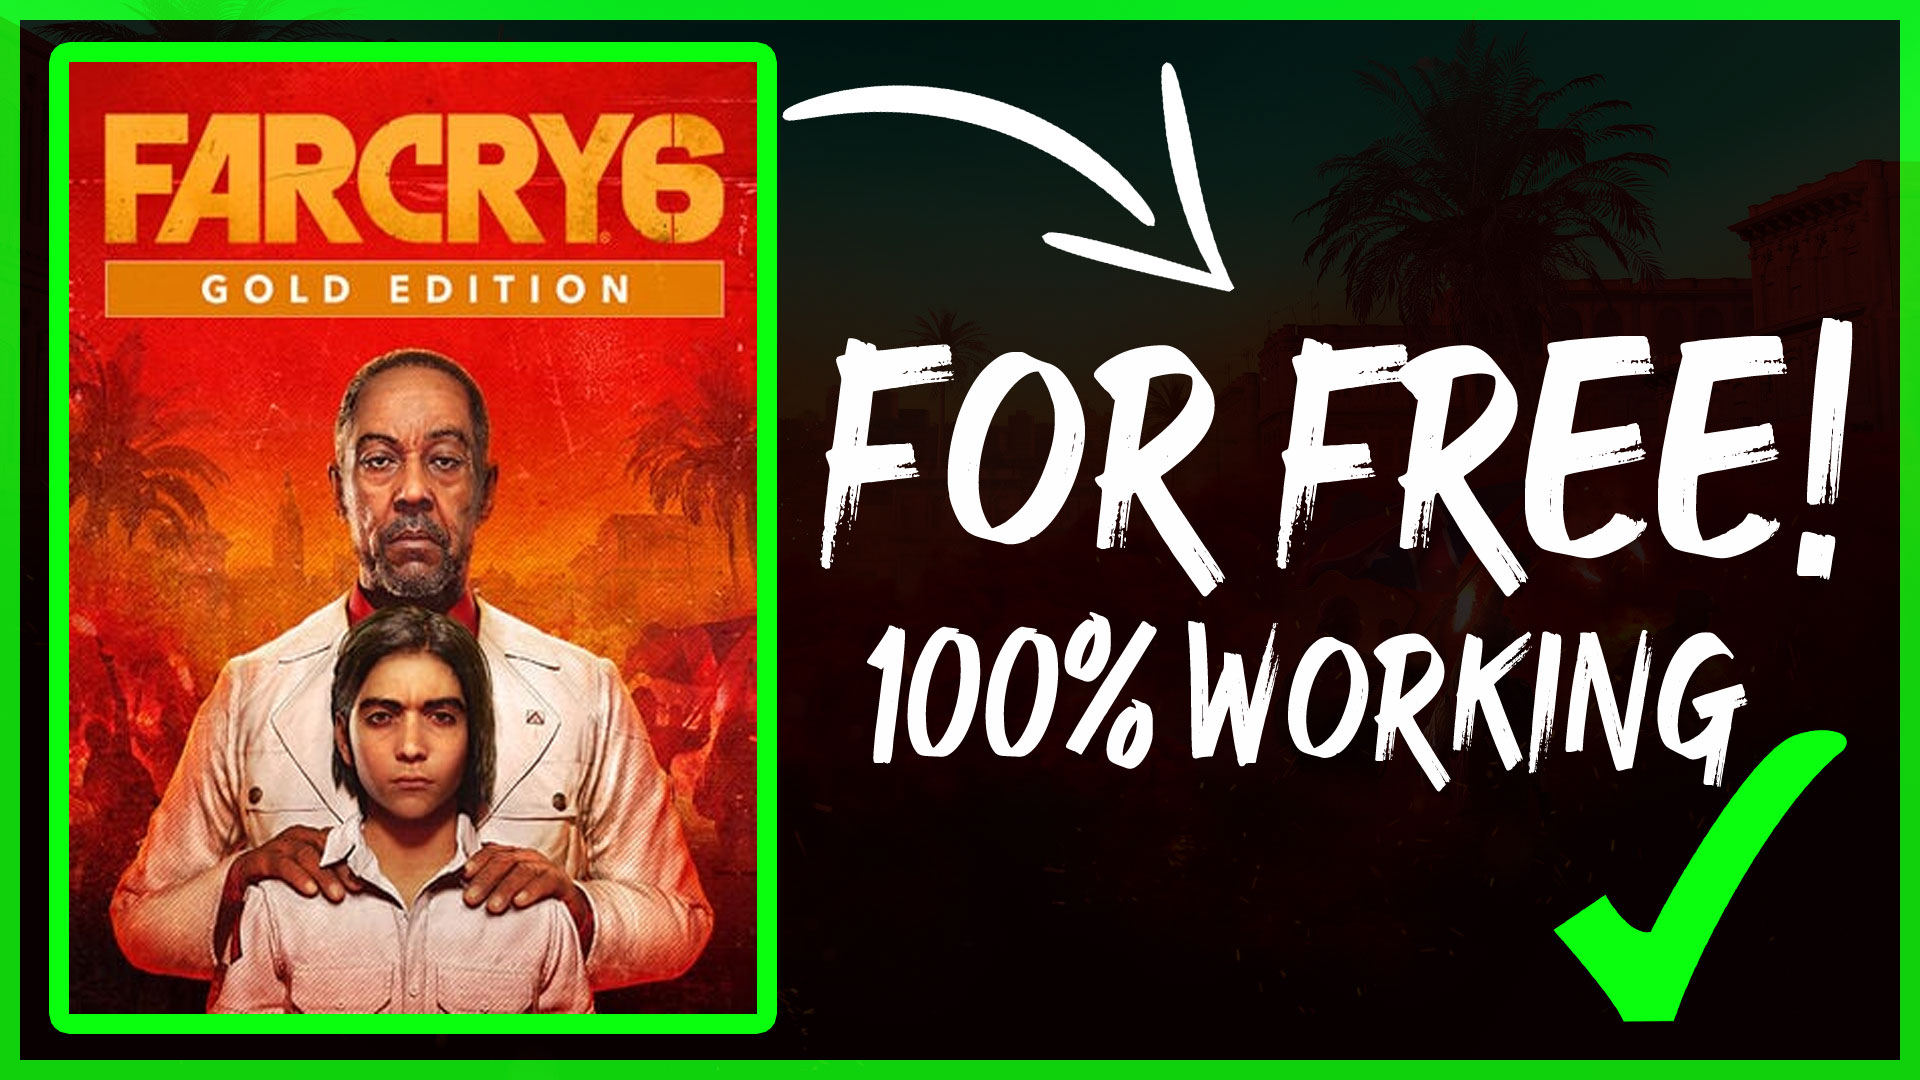 far cry 6 download, far cry 6 free download, far cry 6 free download pc, far cry 6 crack, far cry 6 cracked, far cry 6 digital download, far cry 6 free download for PC, far cry 6 pc download, amd ryzen far cry 6 download, far cry 6 free download for pc highly compressed, far cry 6 for free, far cry 6 trailer download, can you download far cry 6 on PC, far cry 6 download PC, far cry 6 download full version, far cry 6 download for pc compressed, far cry 6 download for windows 10, far cry 6 download code, far cry 6 game download for PC, farcry 6 free,